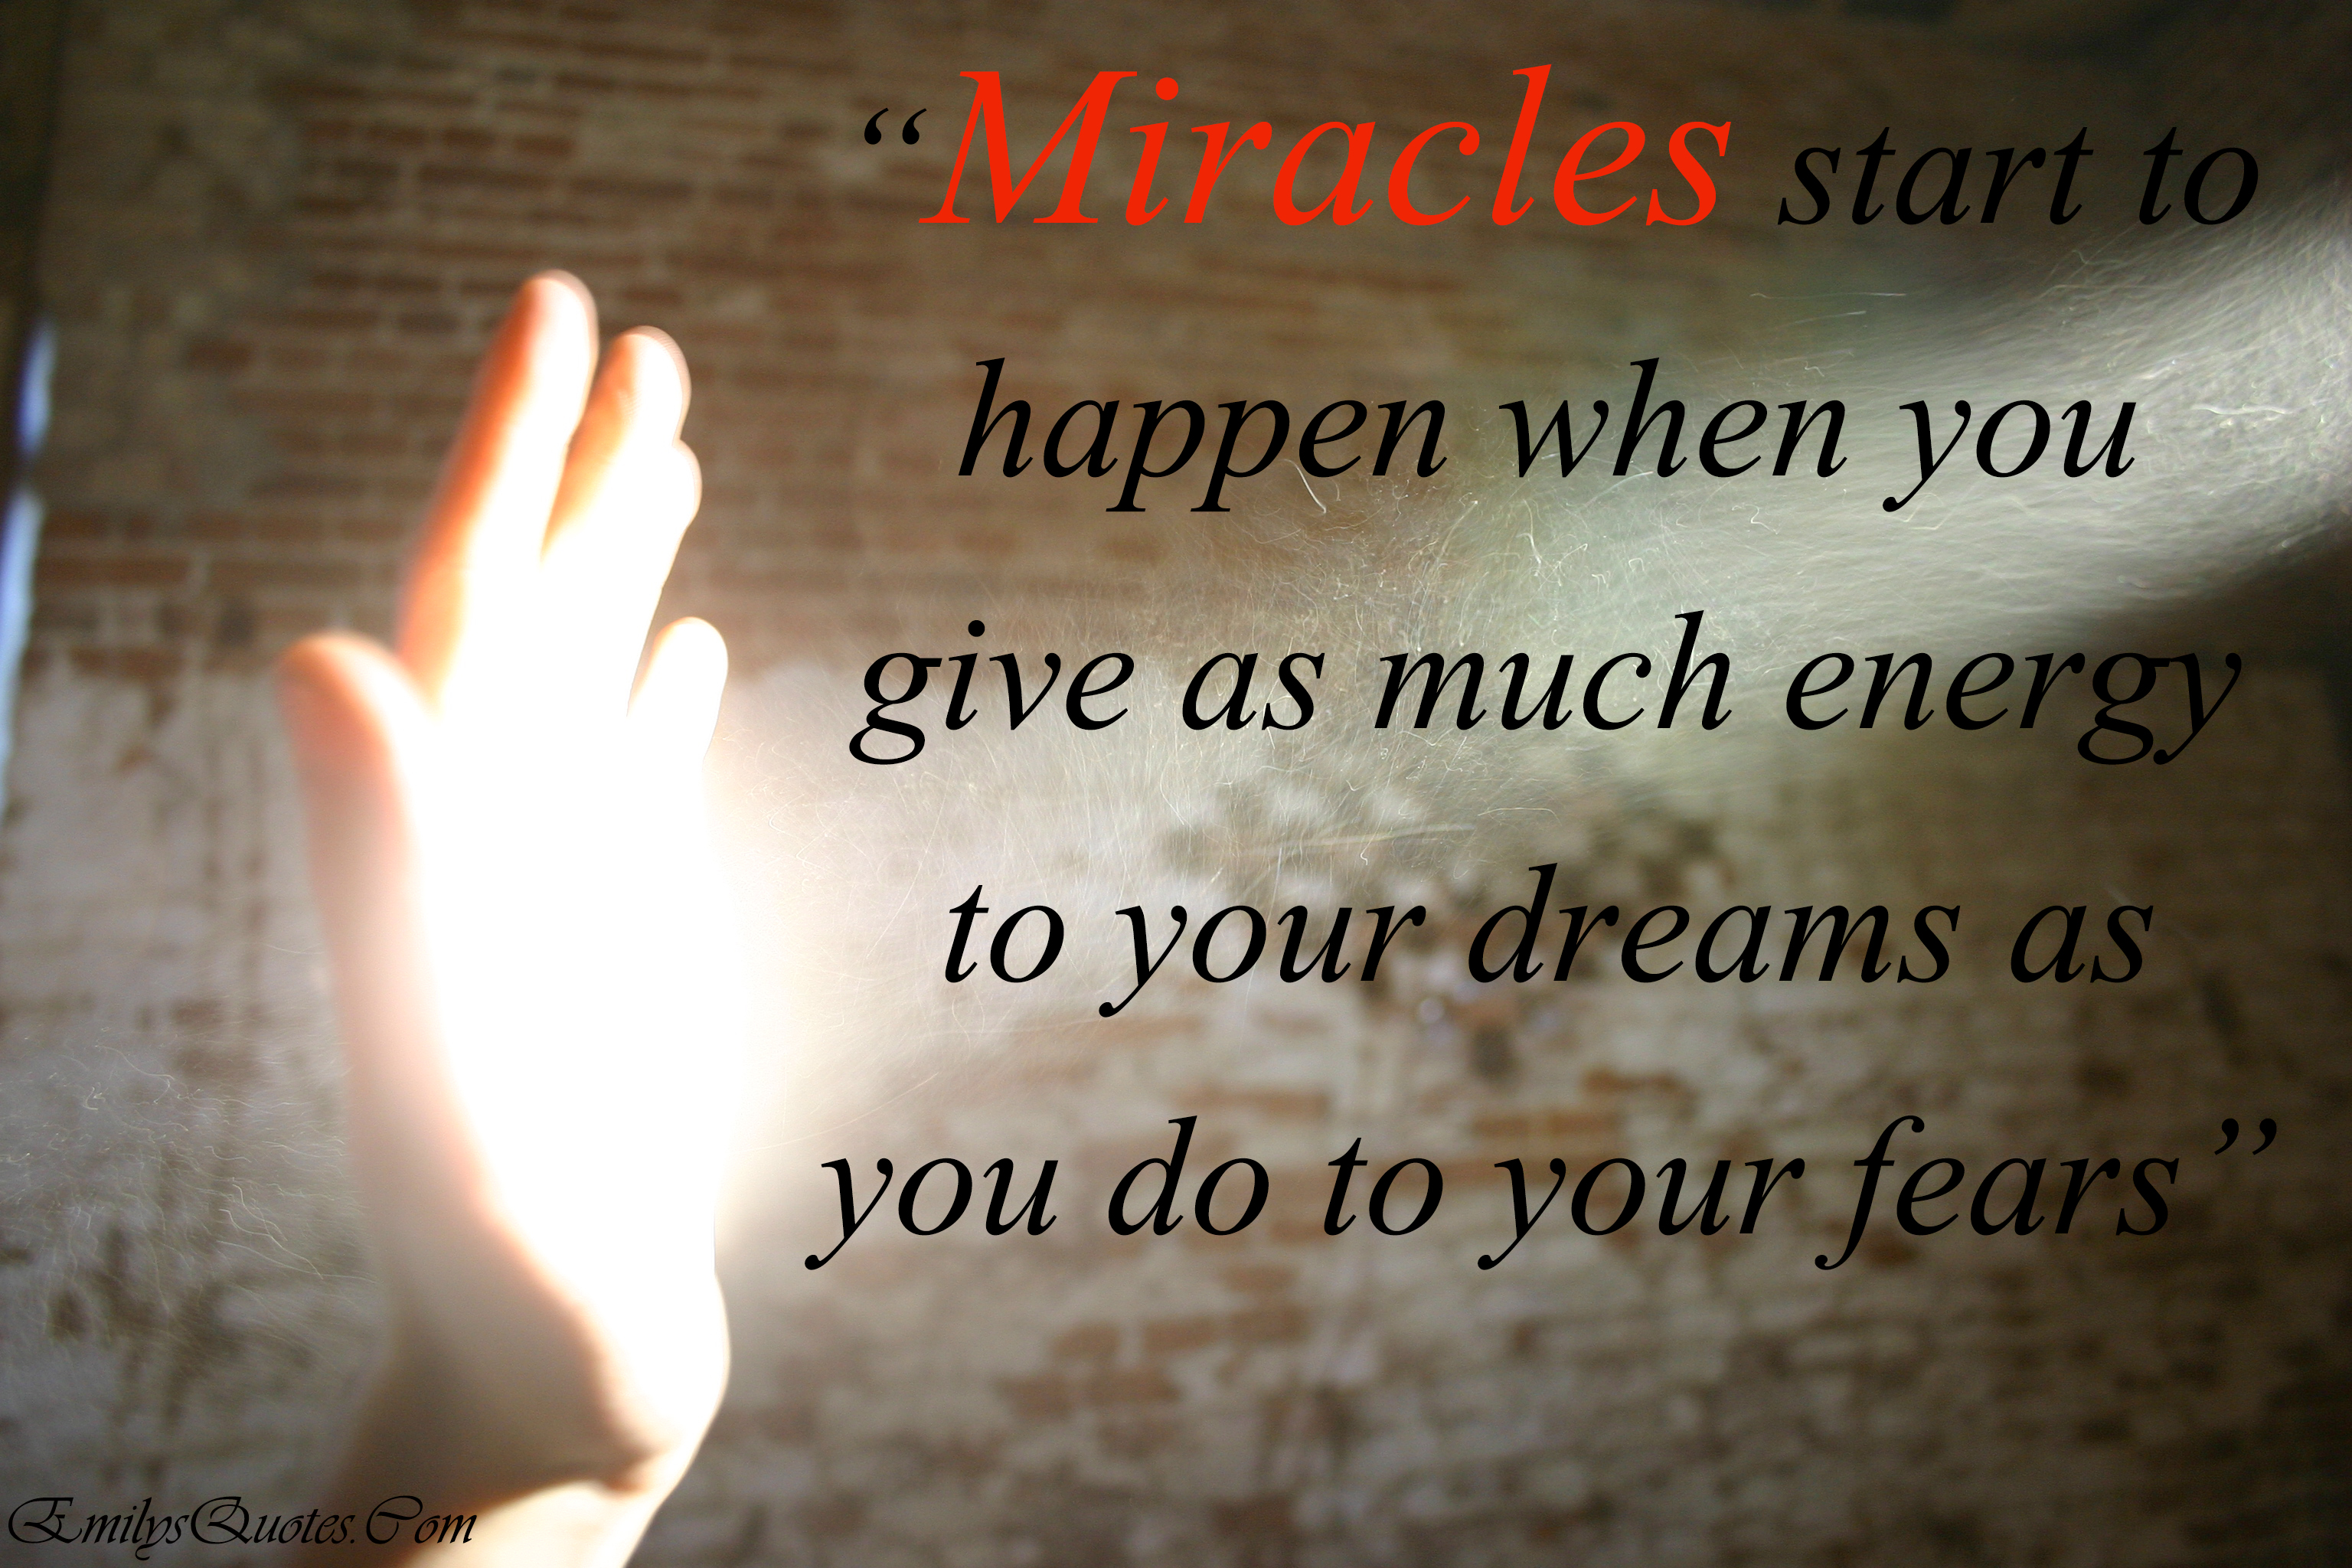 Miracles start to happen when you give as much energy to your dreams as you do to your fears